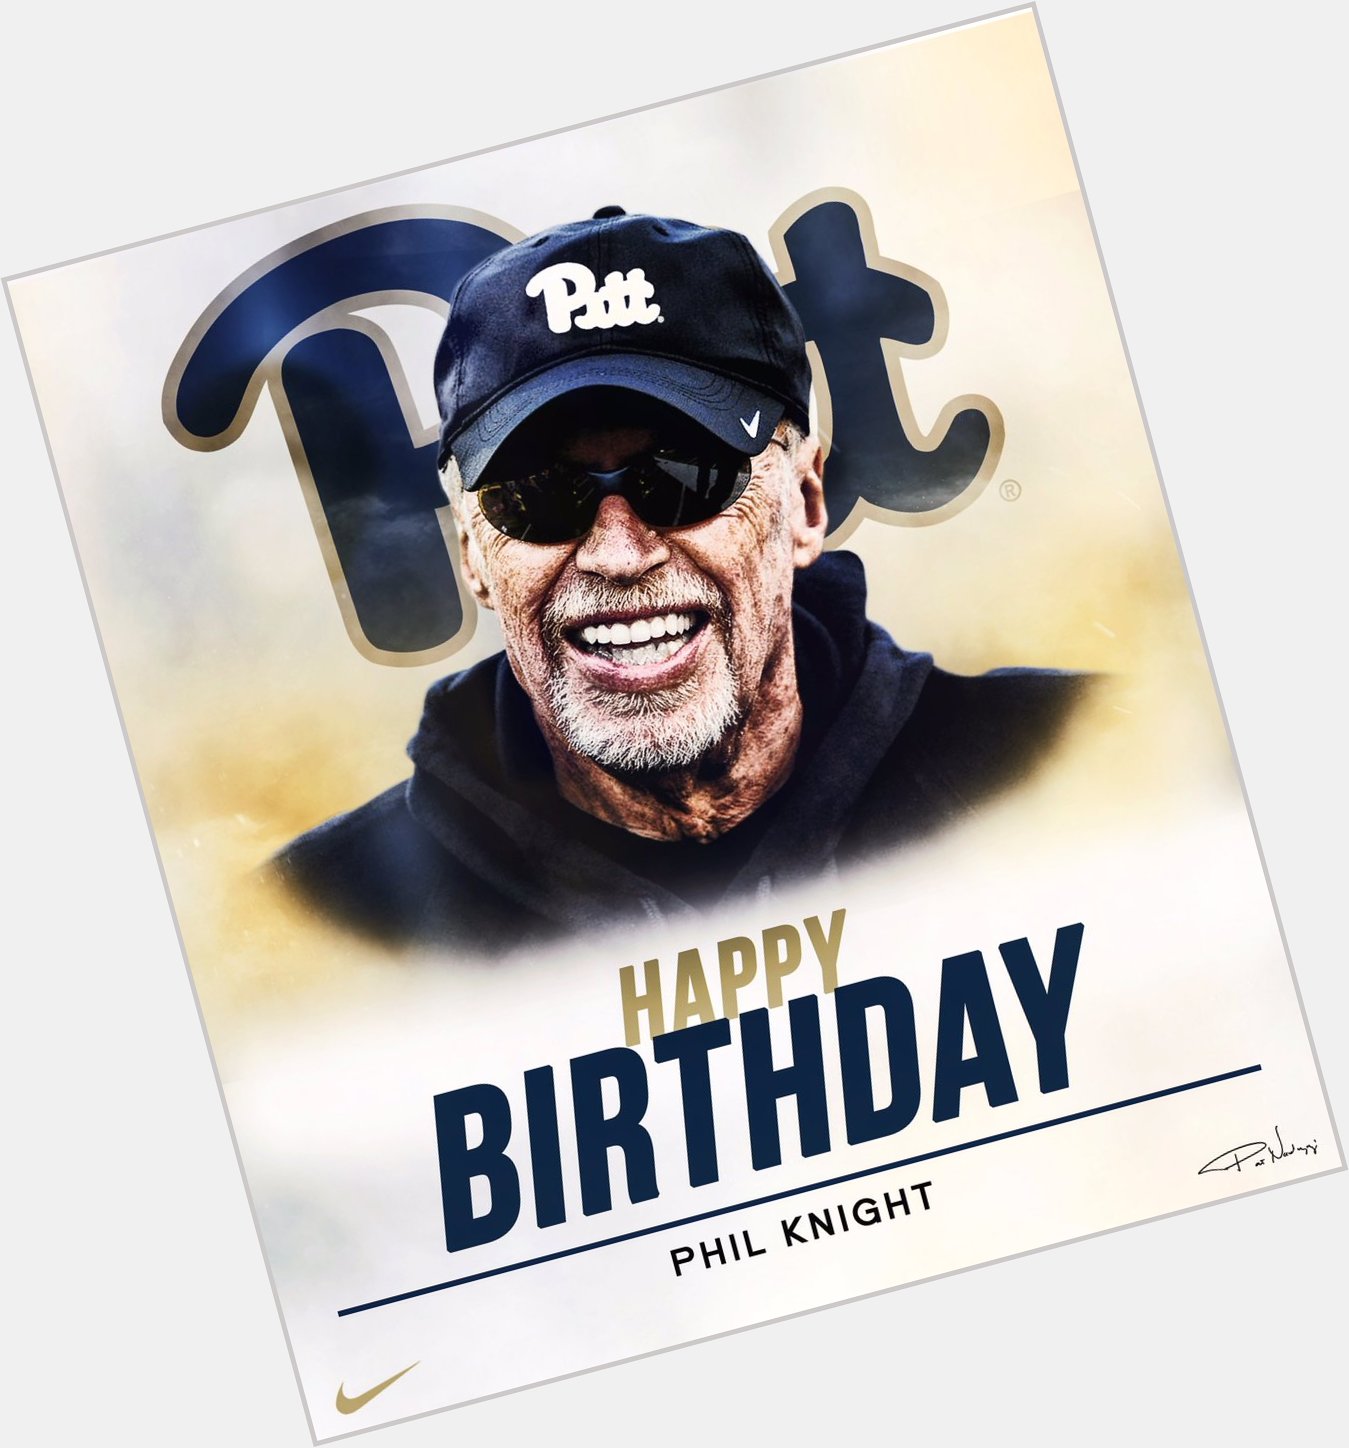 Happy Birthday to Nike Co-Founder and friend, Phil Knight! Pitt is proud to wear Nike!! 